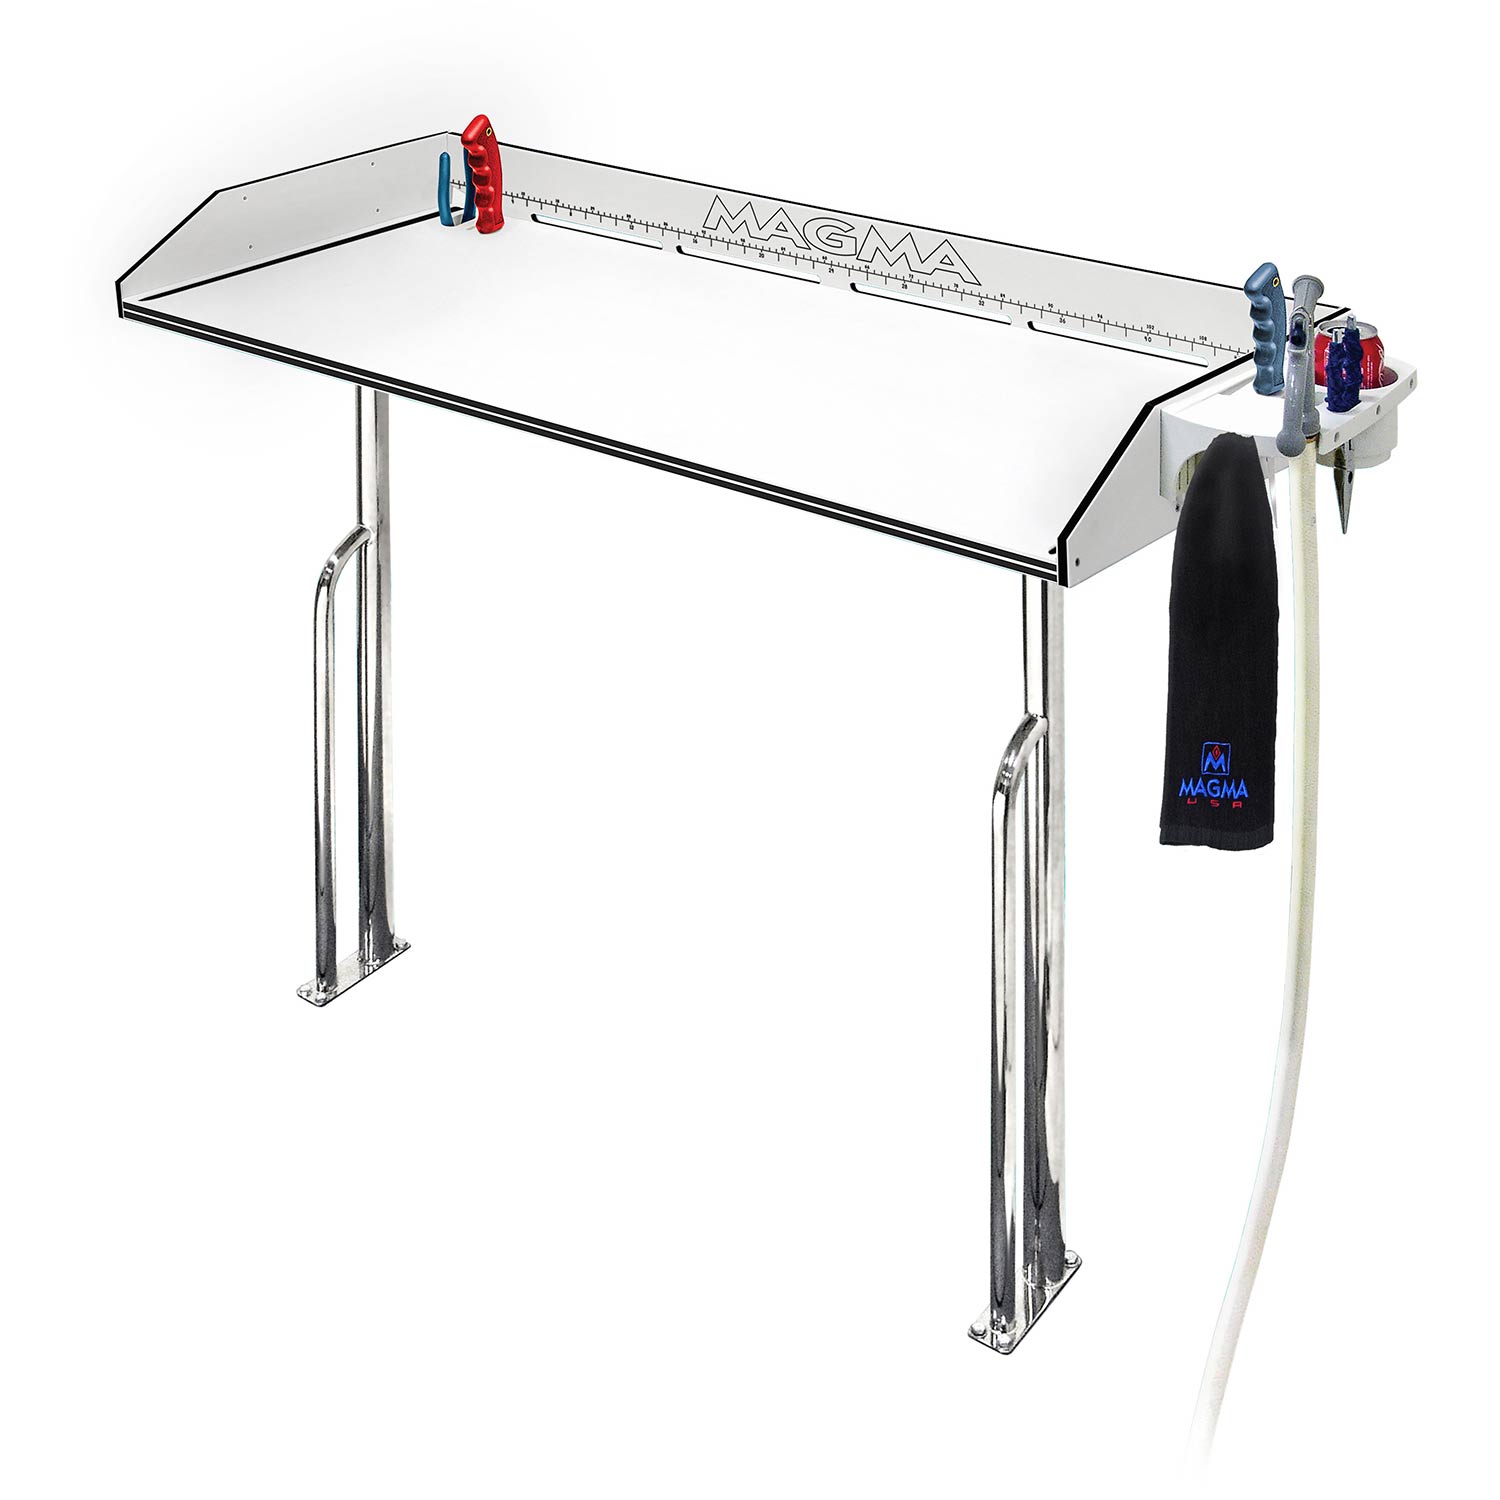 MAGMA Tournament Series™ Dock Cleaning Station